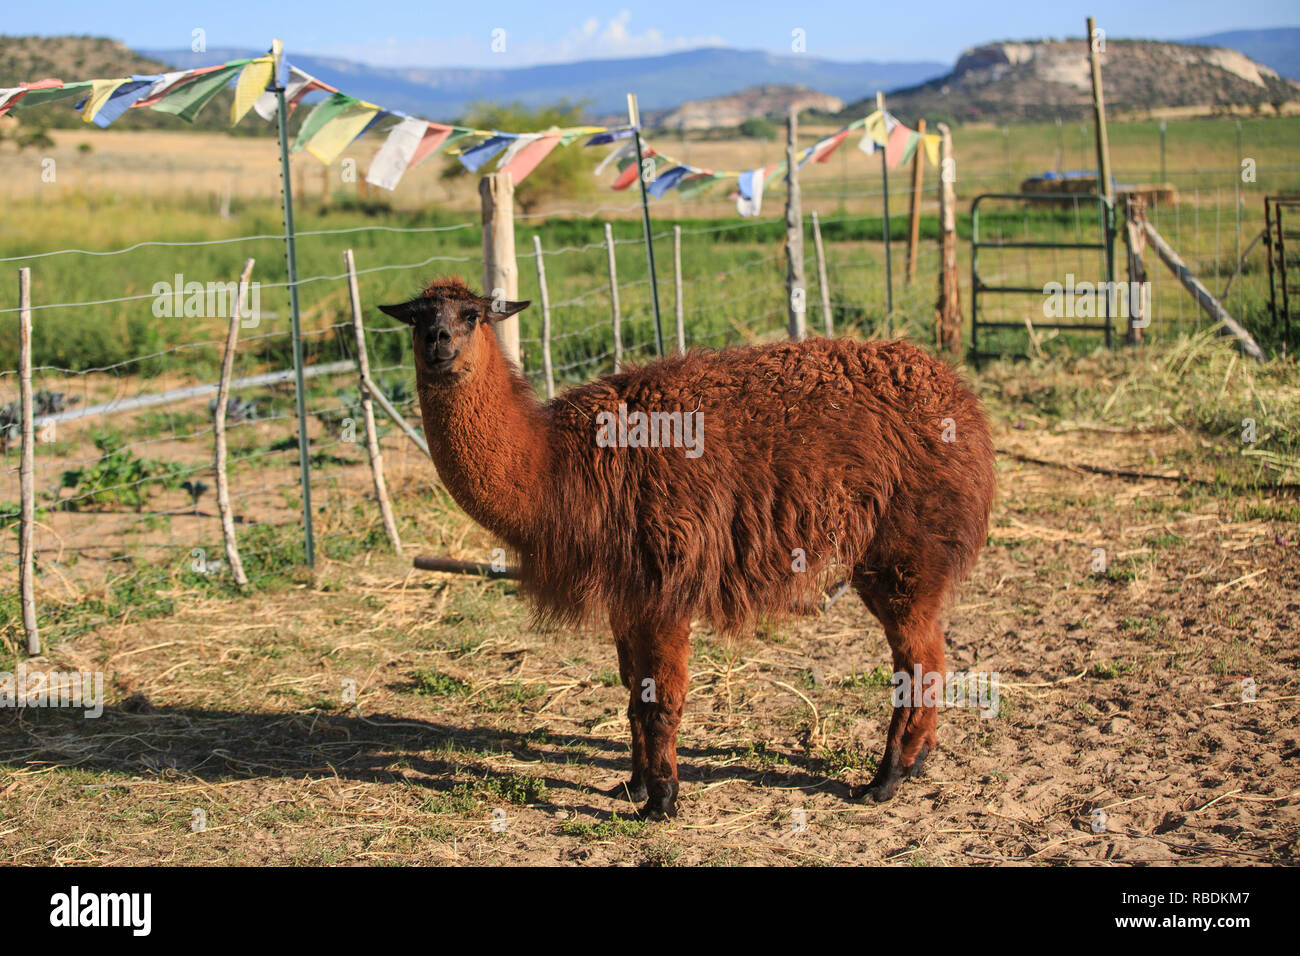 A llama stands in a field on an organic farm in Utah, with a vast landscape and Tibetan prayer flags hanging the background Stock Photo